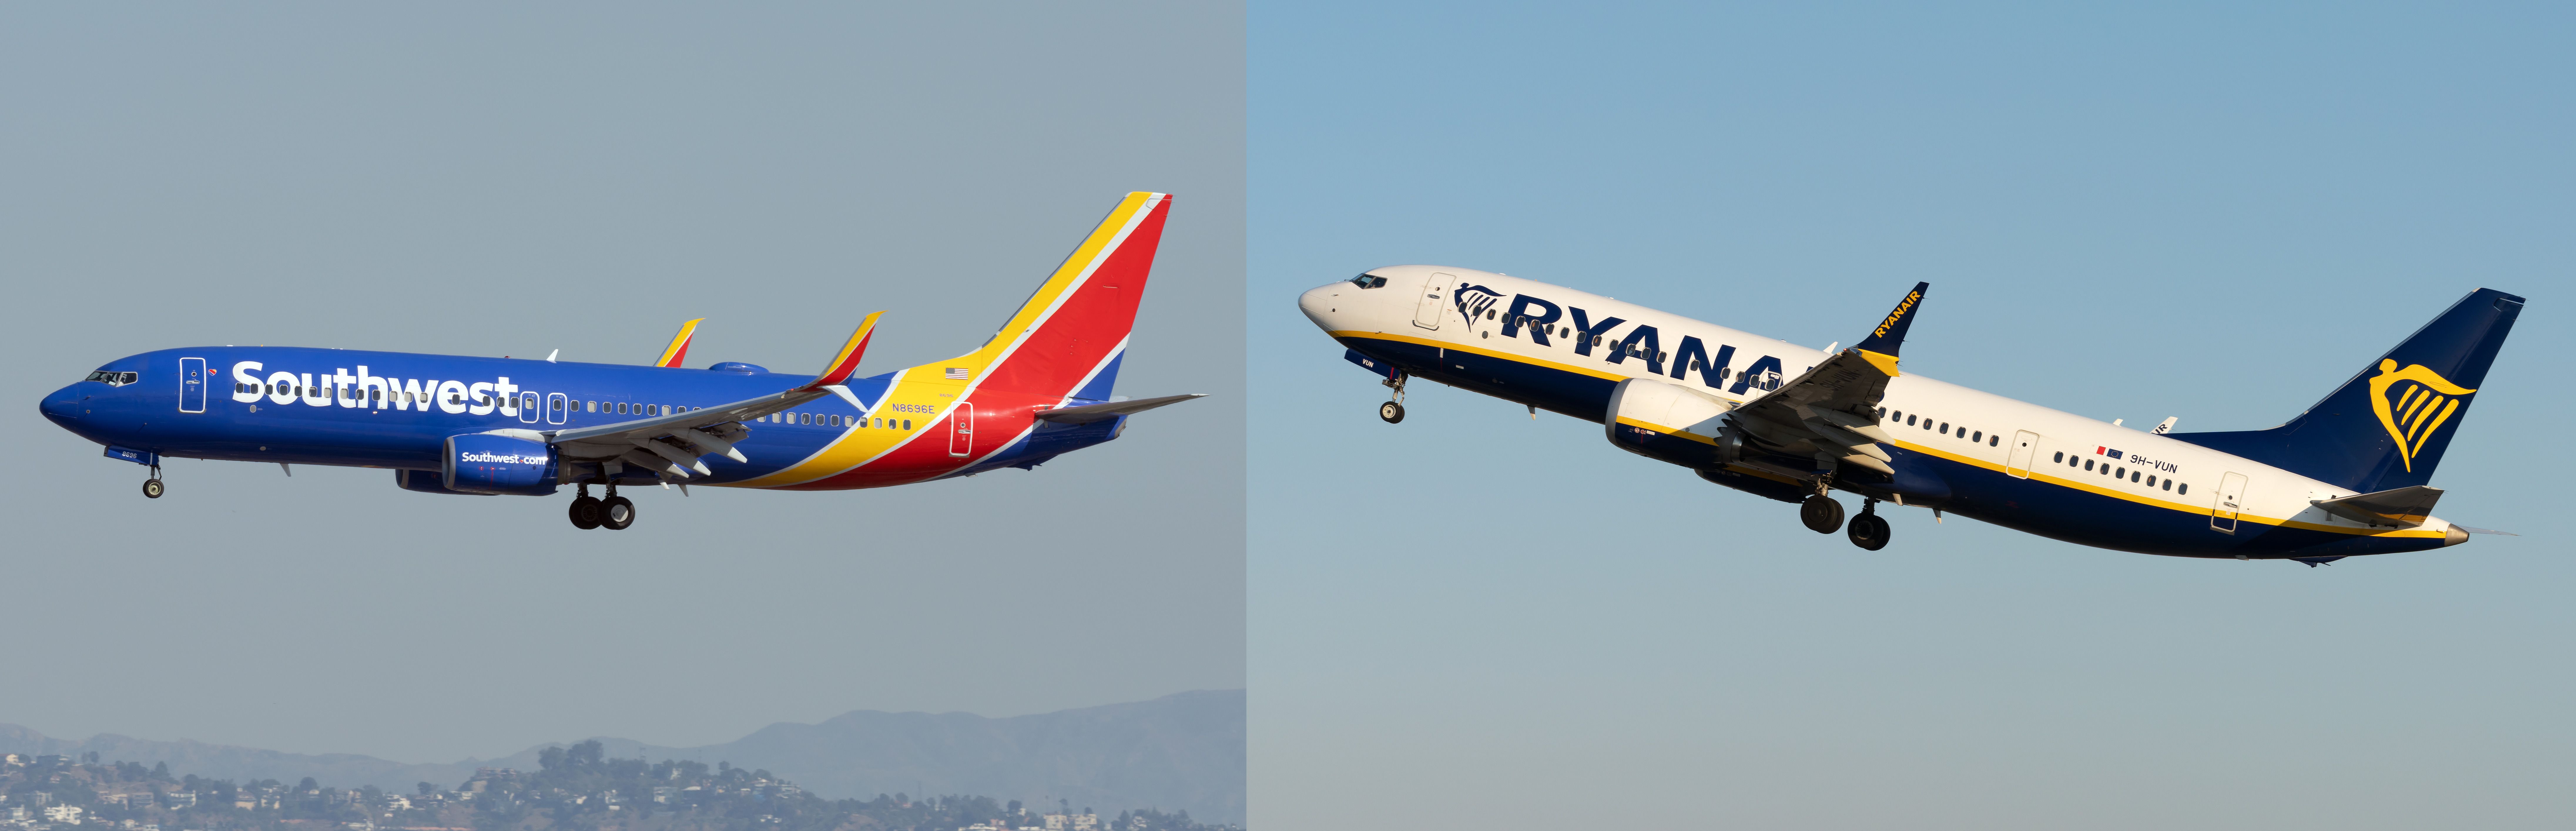 Southwest and Ryanair 737s photoshopped next to each other.